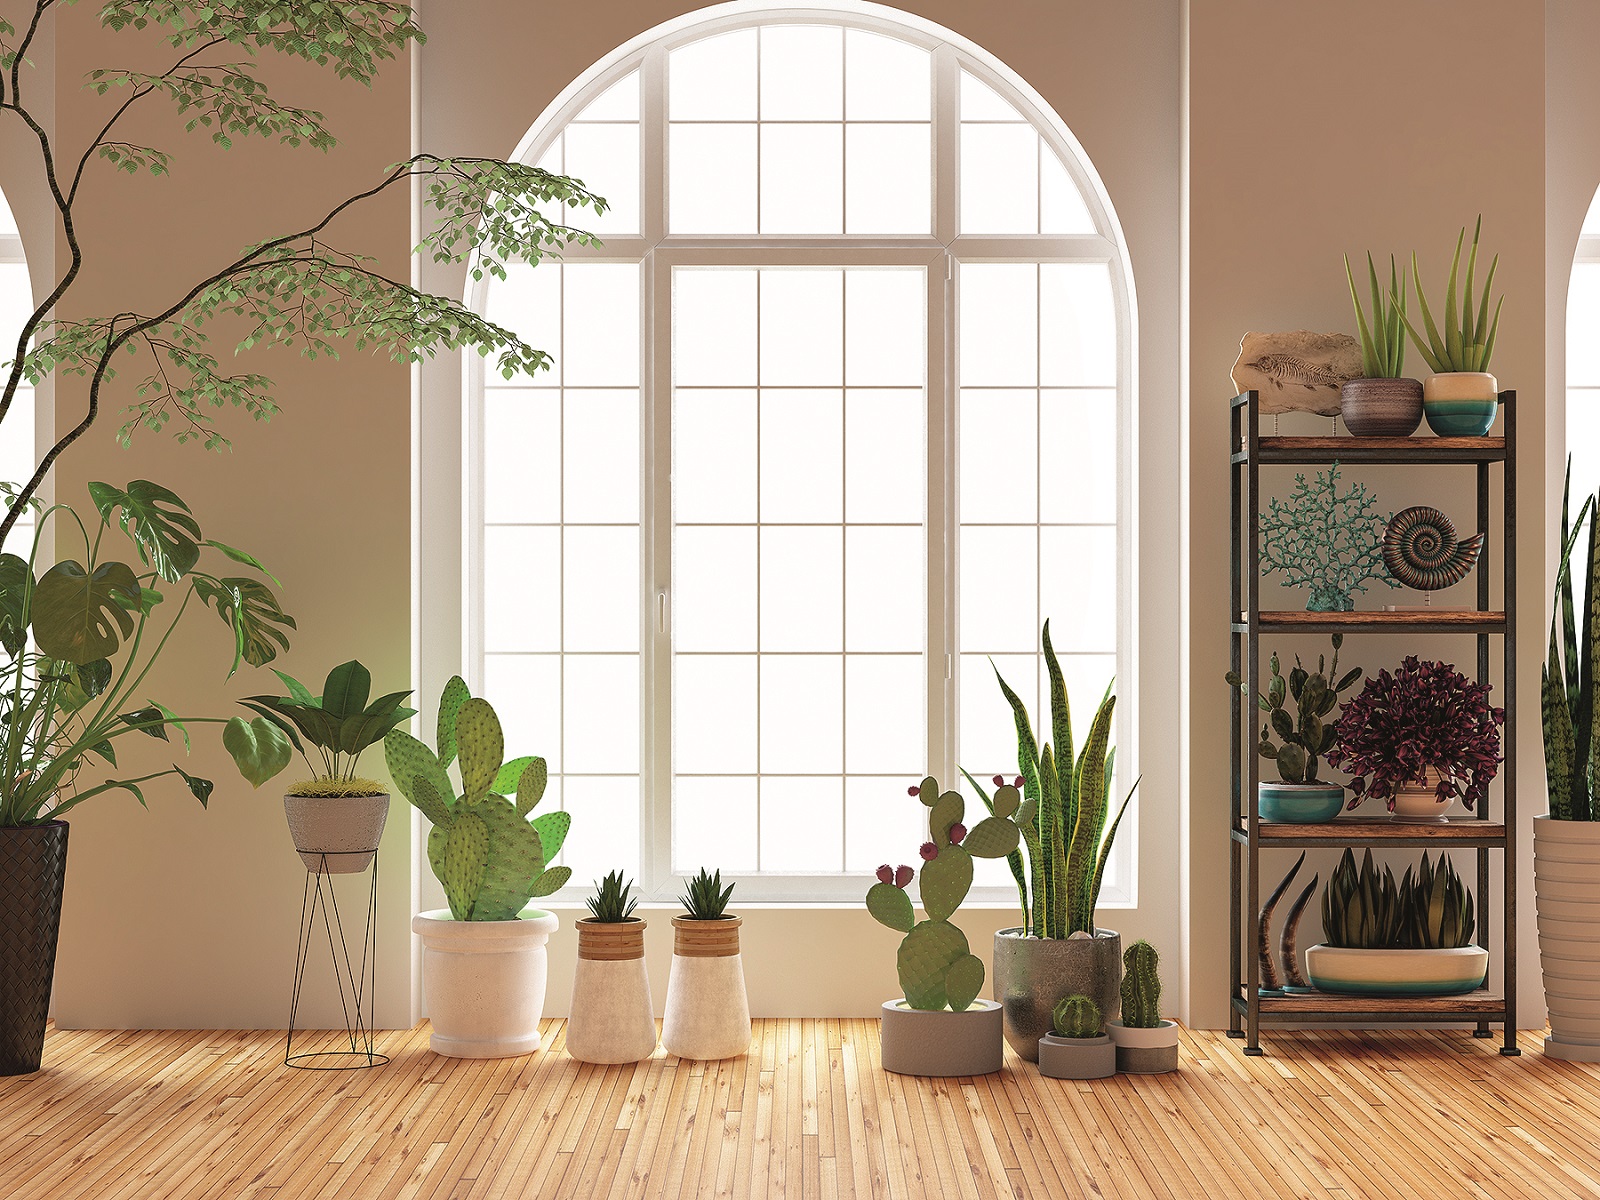 Green Plants and Flowers with Window. 3d Render